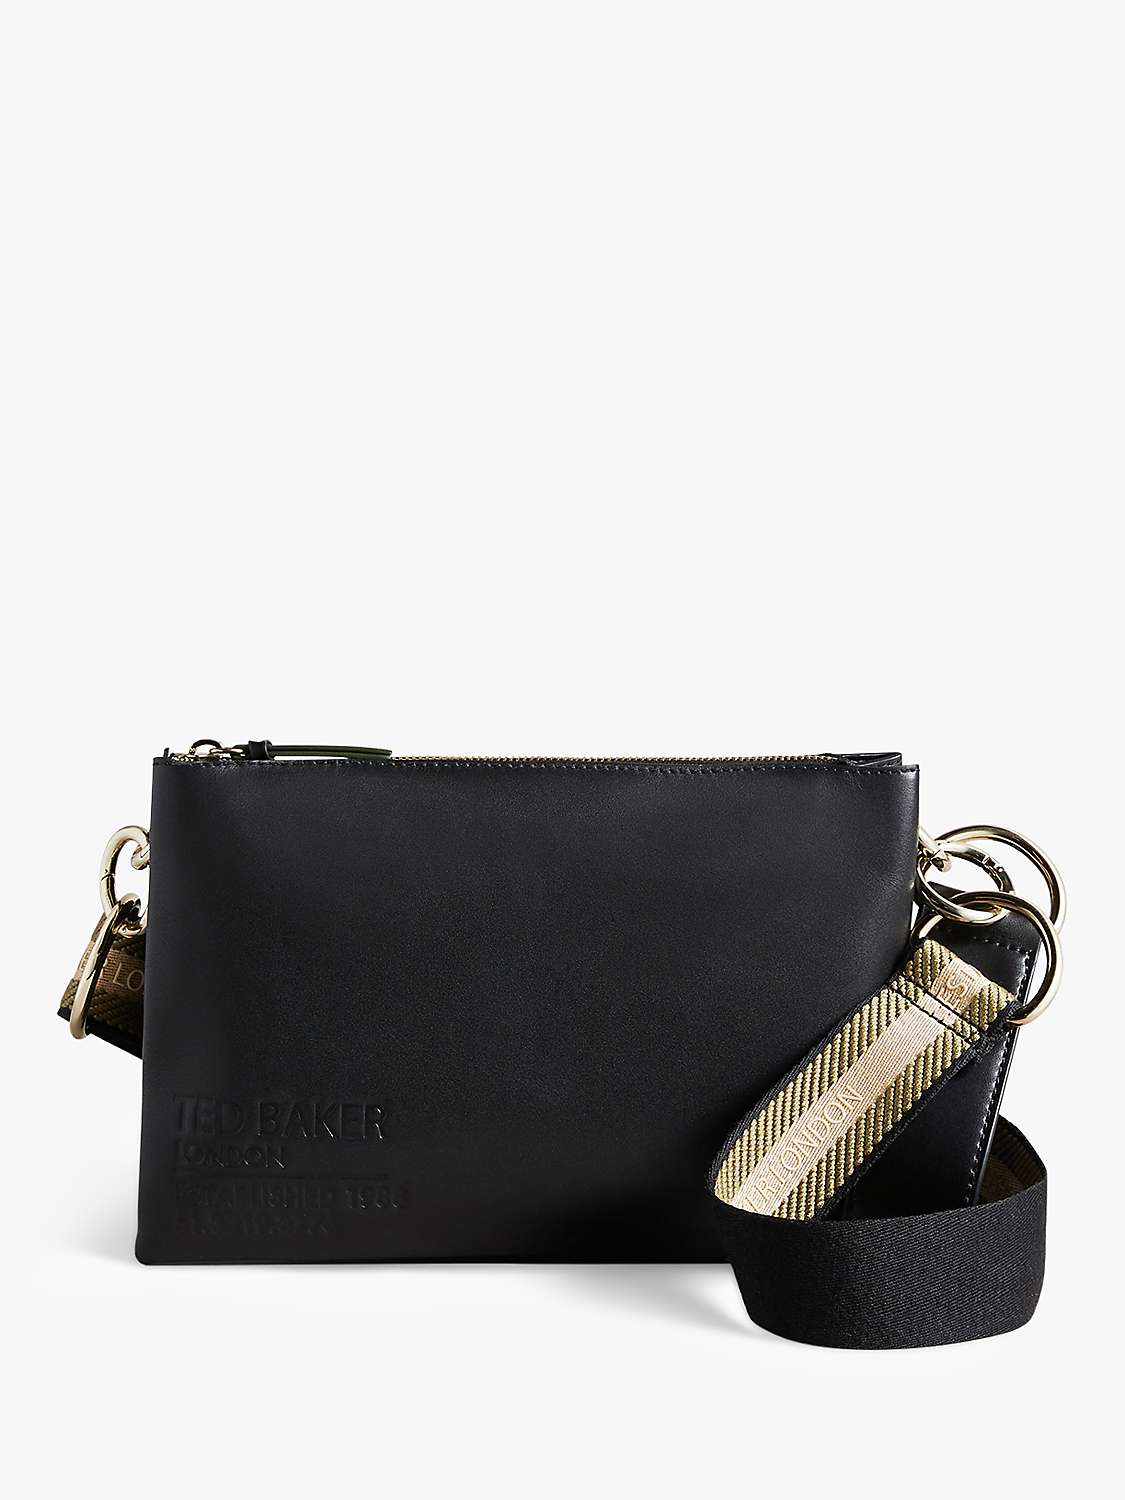 Buy Ted Baker Darceyy Leather Cross Body Bag Online at johnlewis.com